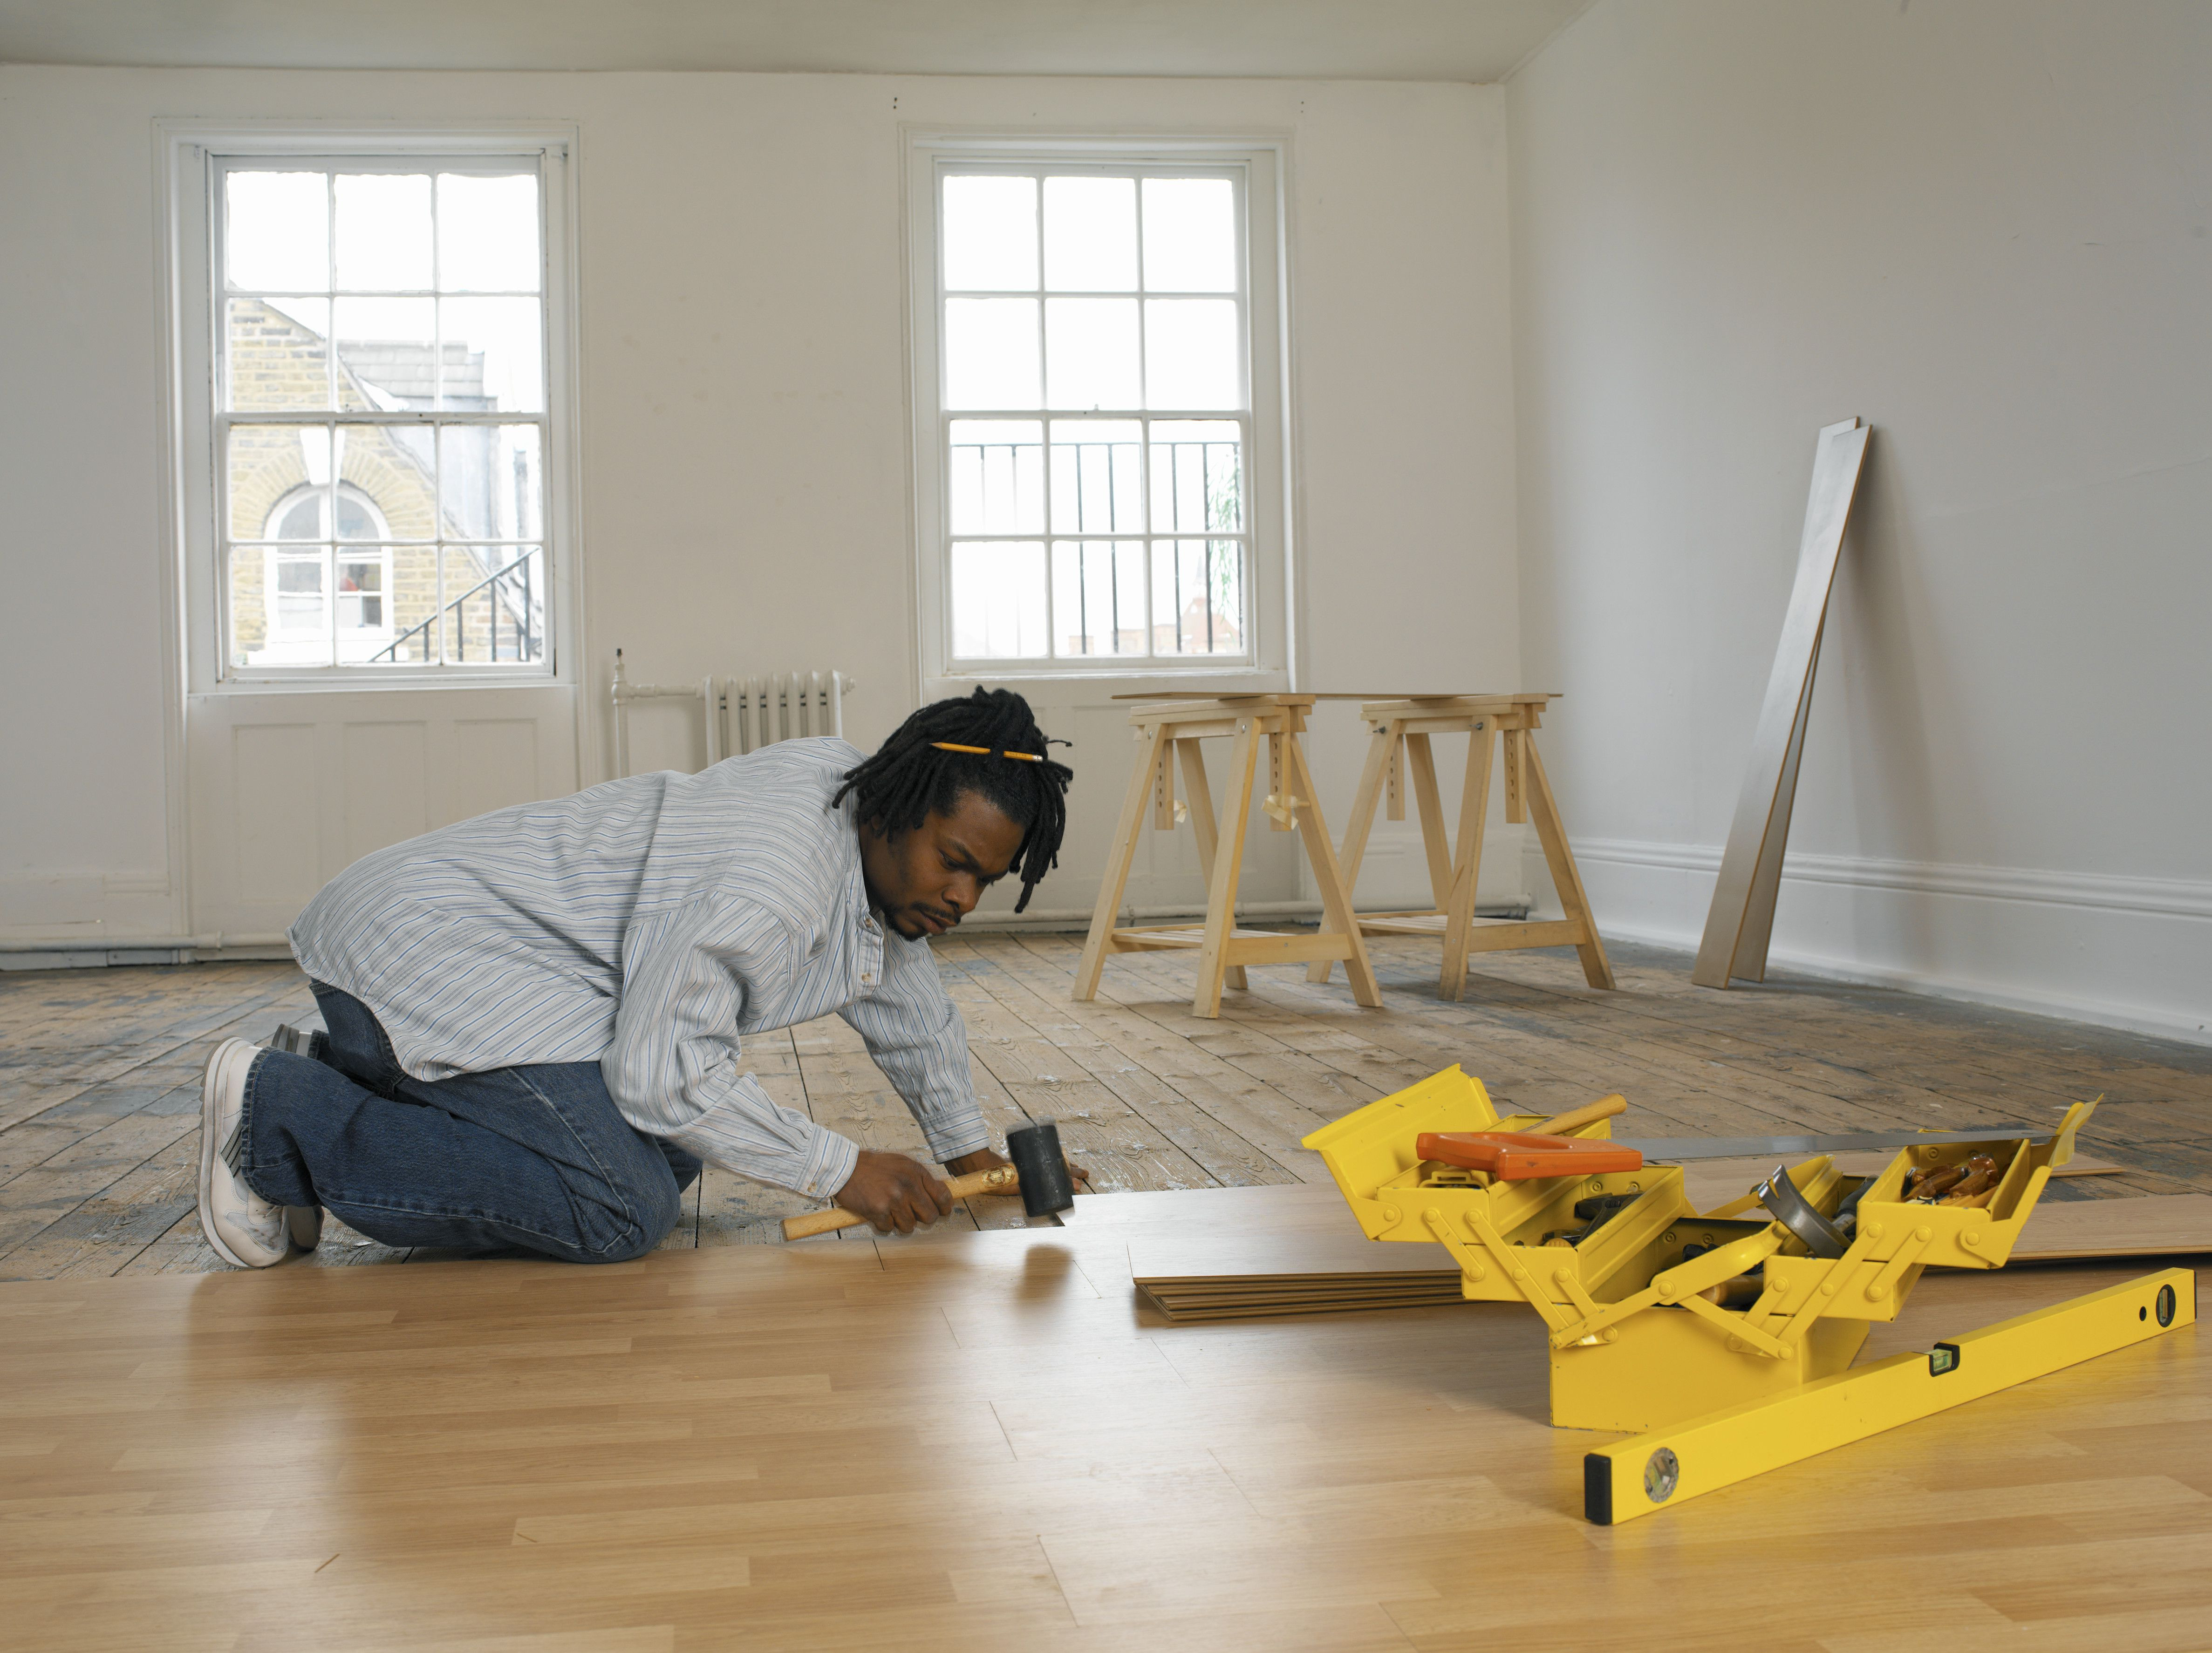 home depot hardwood floor restorer of ikea flooring review overview with regard to young man laying floor 200199826 001 57e96a973df78c690f719440